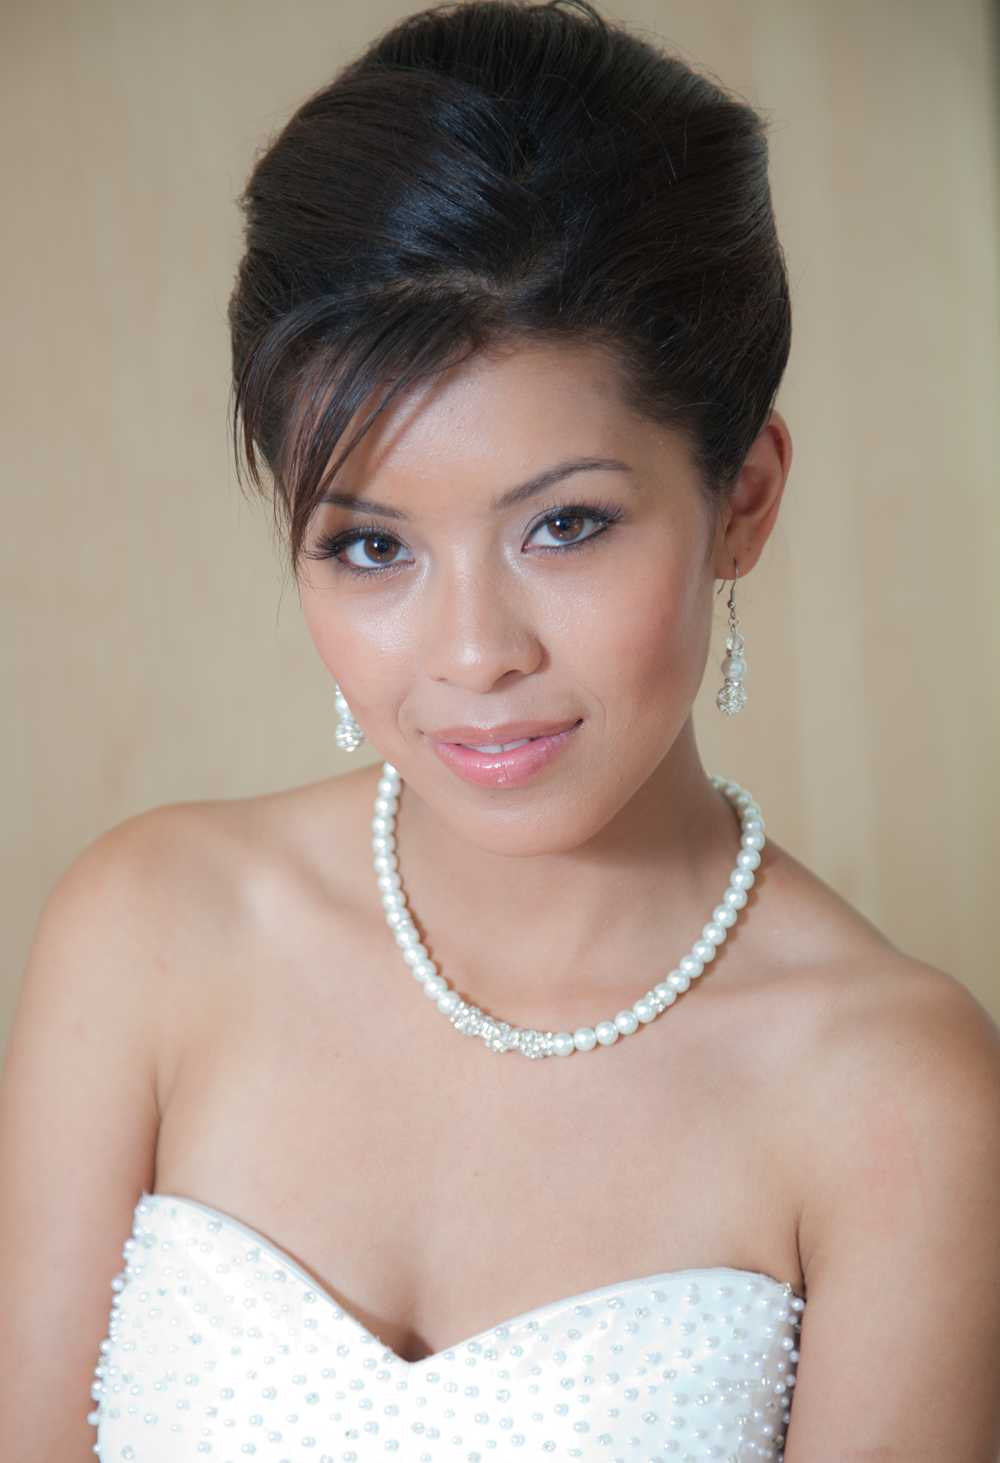 Emma - Stunning Pearl And Rhinestone Fireball Necklace From Claybouquetshop